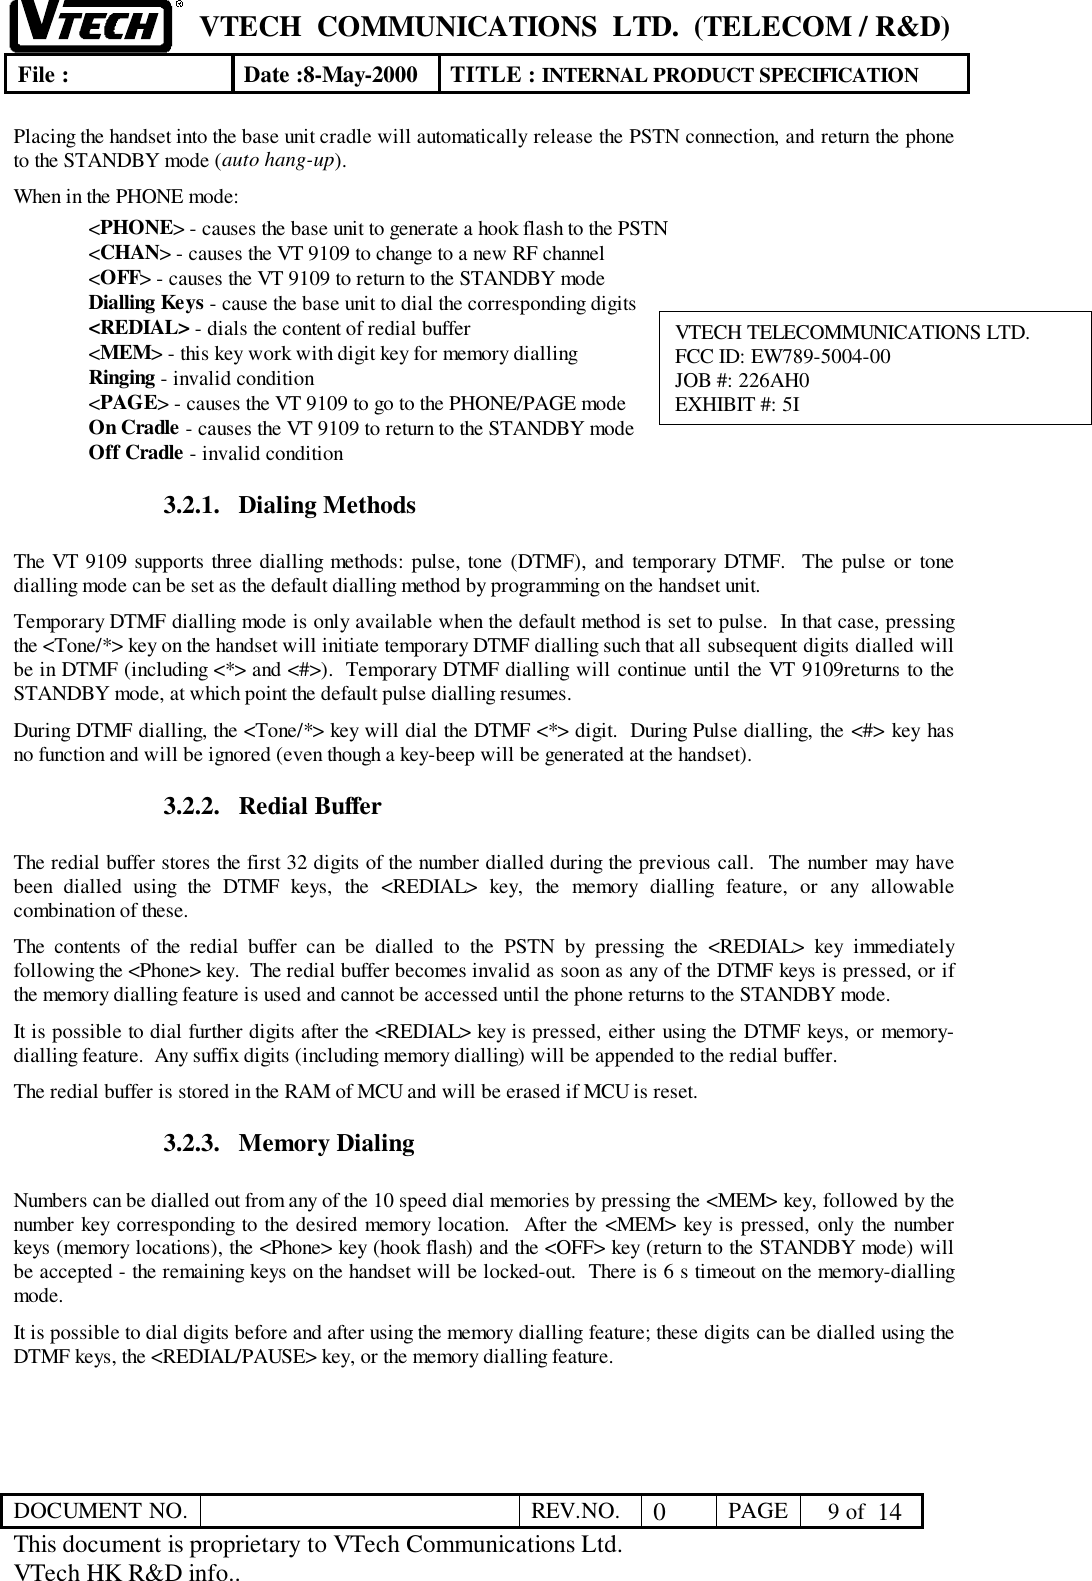 VTECH  COMMUNICATIONS  LTD.  (TELECOM / R&amp;D)File : Date :8-May-2000 TITLE : INTERNAL PRODUCT SPECIFICATIONDOCUMENT NO. REV.NO. 0PAGE  9 of  14This document is proprietary to VTech Communications Ltd.VTech HK R&amp;D info..Placing the handset into the base unit cradle will automatically release the PSTN connection, and return the phoneto the STANDBY mode (auto hang-up).When in the PHONE mode:&lt;PHONE&gt; - causes the base unit to generate a hook flash to the PSTN&lt;CHAN&gt; - causes the VT 9109 to change to a new RF channel&lt;OFF&gt; - causes the VT 9109 to return to the STANDBY modeDialling Keys - cause the base unit to dial the corresponding digits&lt;REDIAL&gt; - dials the content of redial buffer&lt;MEM&gt; - this key work with digit key for memory diallingRinging - invalid condition&lt;PAGE&gt; - causes the VT 9109 to go to the PHONE/PAGE modeOn Cradle - causes the VT 9109 to return to the STANDBY modeOff Cradle - invalid condition3.2.1. Dialing MethodsThe VT 9109 supports three dialling methods: pulse, tone (DTMF), and temporary DTMF.  The pulse or tonedialling mode can be set as the default dialling method by programming on the handset unit.Temporary DTMF dialling mode is only available when the default method is set to pulse.  In that case, pressingthe &lt;Tone/*&gt; key on the handset will initiate temporary DTMF dialling such that all subsequent digits dialled willbe in DTMF (including &lt;*&gt; and &lt;#&gt;).  Temporary DTMF dialling will continue until the VT 9109returns to theSTANDBY mode, at which point the default pulse dialling resumes.During DTMF dialling, the &lt;Tone/*&gt; key will dial the DTMF &lt;*&gt; digit.  During Pulse dialling, the &lt;#&gt; key hasno function and will be ignored (even though a key-beep will be generated at the handset).3.2.2. Redial BufferThe redial buffer stores the first 32 digits of the number dialled during the previous call.  The number may havebeen dialled using the DTMF keys, the &lt;REDIAL&gt; key, the memory dialling feature, or any allowablecombination of these.The contents of the redial buffer can be dialled to the PSTN by pressing the &lt;REDIAL&gt; key immediatelyfollowing the &lt;Phone&gt; key.  The redial buffer becomes invalid as soon as any of the DTMF keys is pressed, or ifthe memory dialling feature is used and cannot be accessed until the phone returns to the STANDBY mode.It is possible to dial further digits after the &lt;REDIAL&gt; key is pressed, either using the DTMF keys, or memory-dialling feature.  Any suffix digits (including memory dialling) will be appended to the redial buffer.The redial buffer is stored in the RAM of MCU and will be erased if MCU is reset.3.2.3. Memory DialingNumbers can be dialled out from any of the 10 speed dial memories by pressing the &lt;MEM&gt; key, followed by thenumber key corresponding to the desired memory location.  After the &lt;MEM&gt; key is pressed, only the numberkeys (memory locations), the &lt;Phone&gt; key (hook flash) and the &lt;OFF&gt; key (return to the STANDBY mode) willbe accepted - the remaining keys on the handset will be locked-out.  There is 6 s timeout on the memory-diallingmode.It is possible to dial digits before and after using the memory dialling feature; these digits can be dialled using theDTMF keys, the &lt;REDIAL/PAUSE&gt; key, or the memory dialling feature.VTECH TELECOMMUNICATIONS LTD.FCC ID: EW789-5004-00JOB #: 226AH0EXHIBIT #: 5I